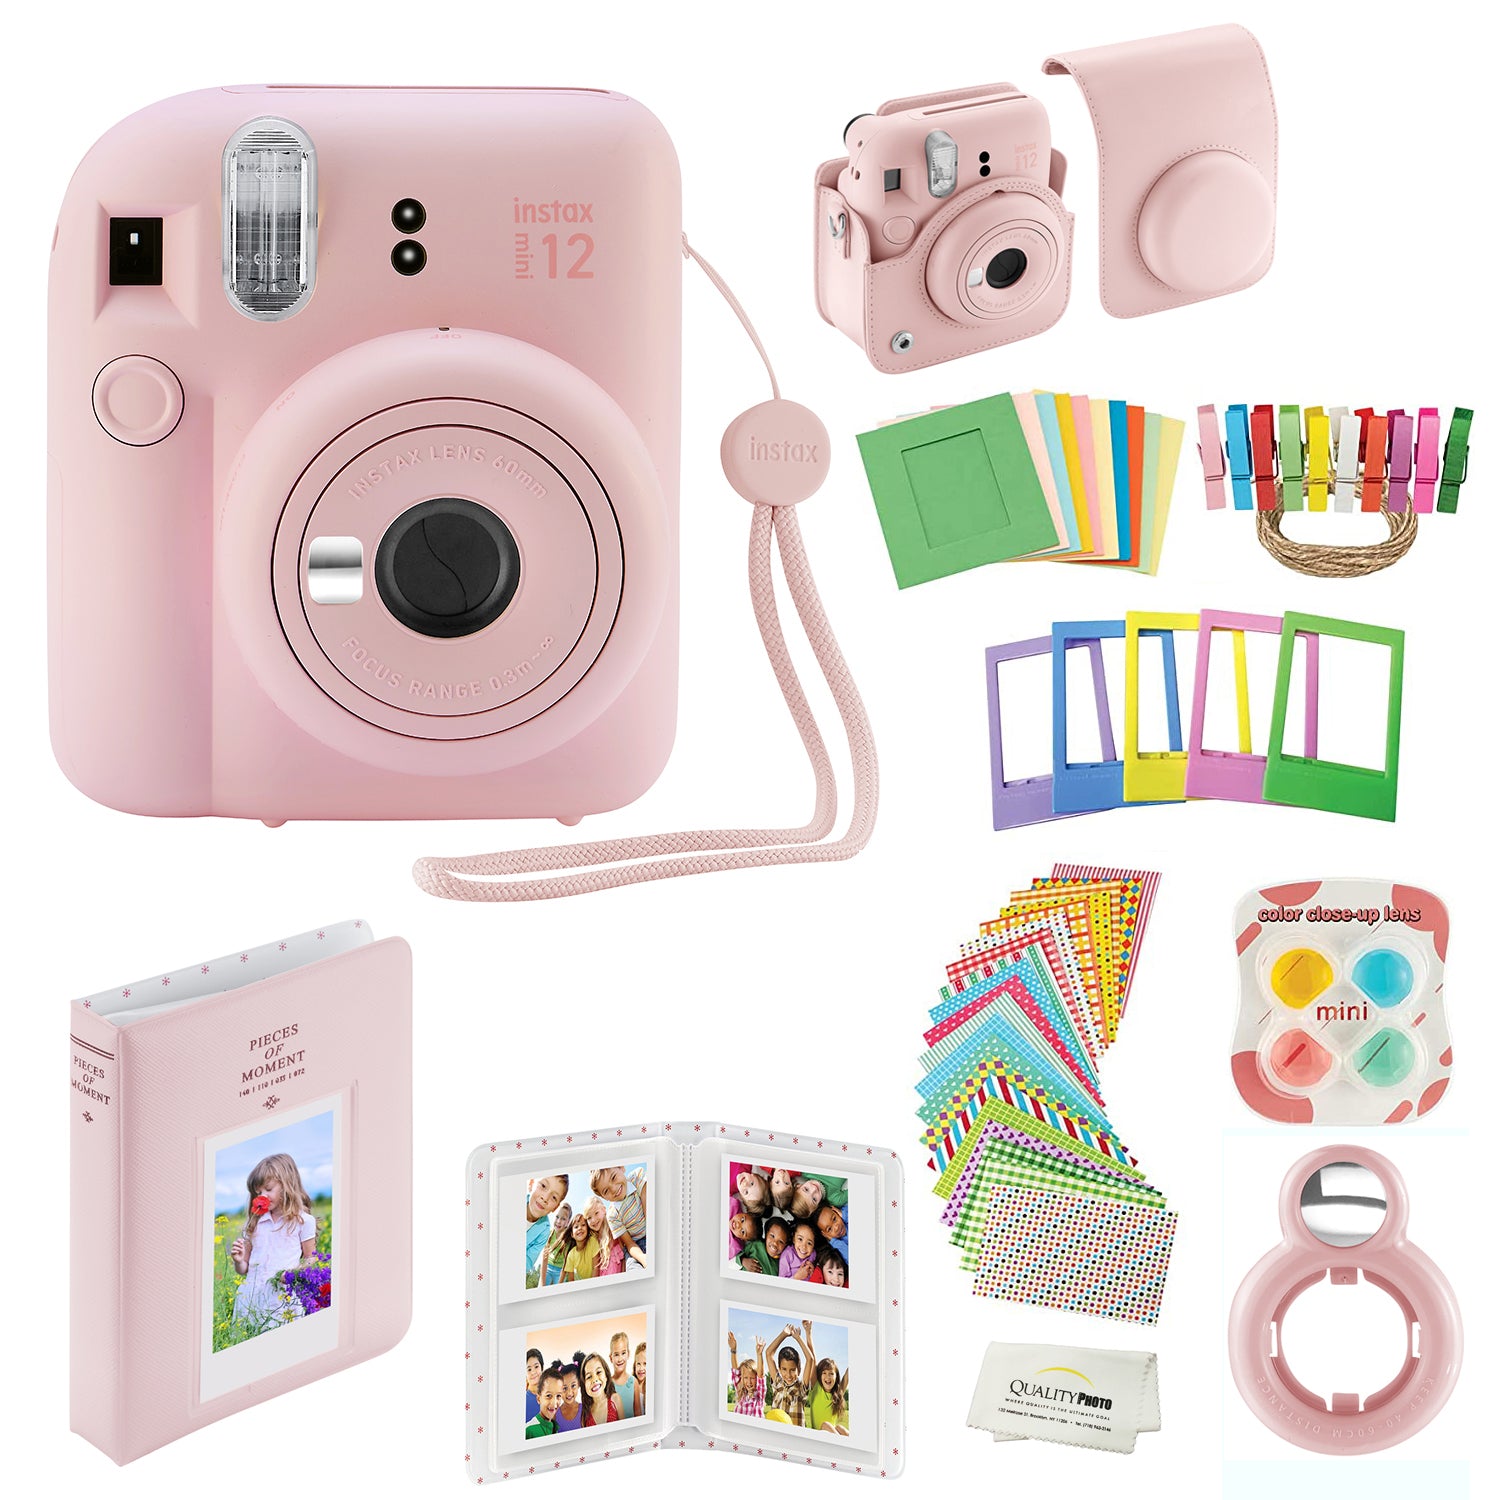 Fujifilm Instax Mini 12 Instant Camera with Case, Decoration Stickers, Frames, Photo Album and More Accessory kit (Blossom Pink)